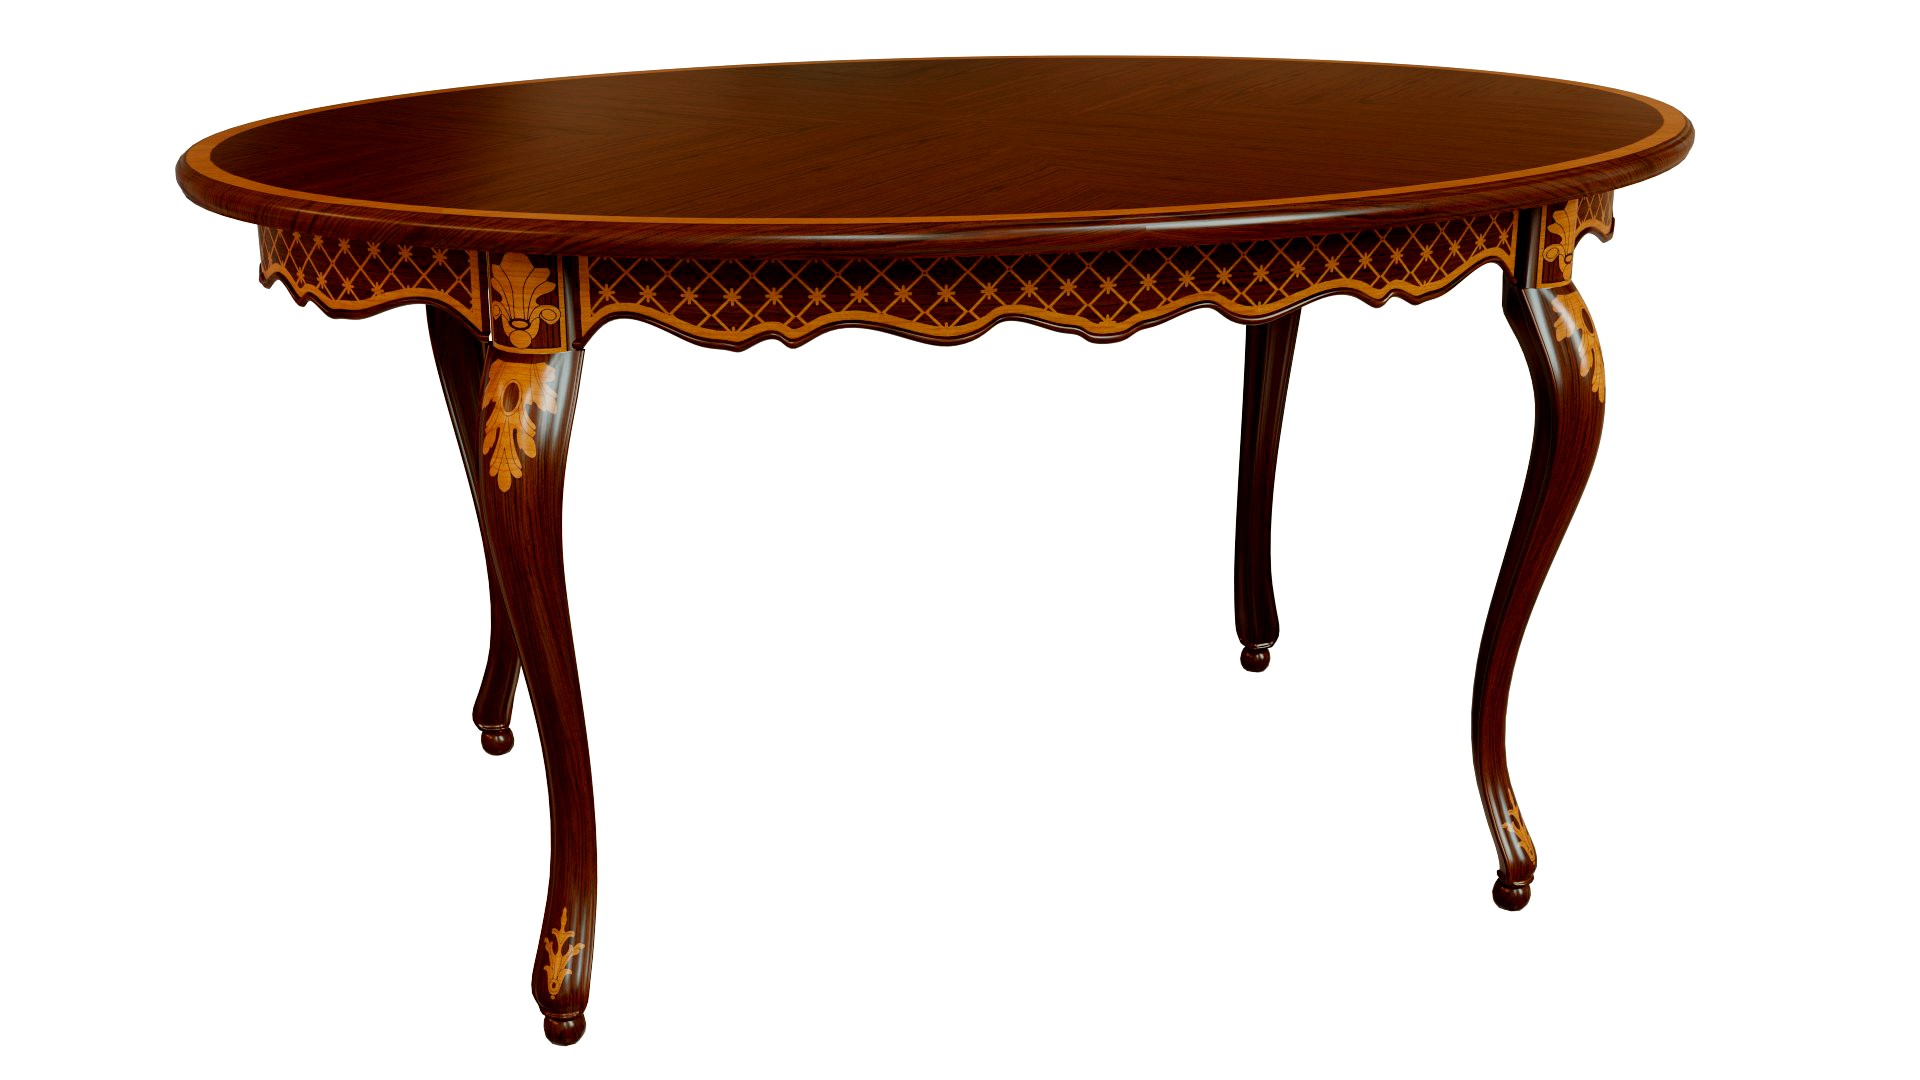 Classic table with inlaid veneer 1500